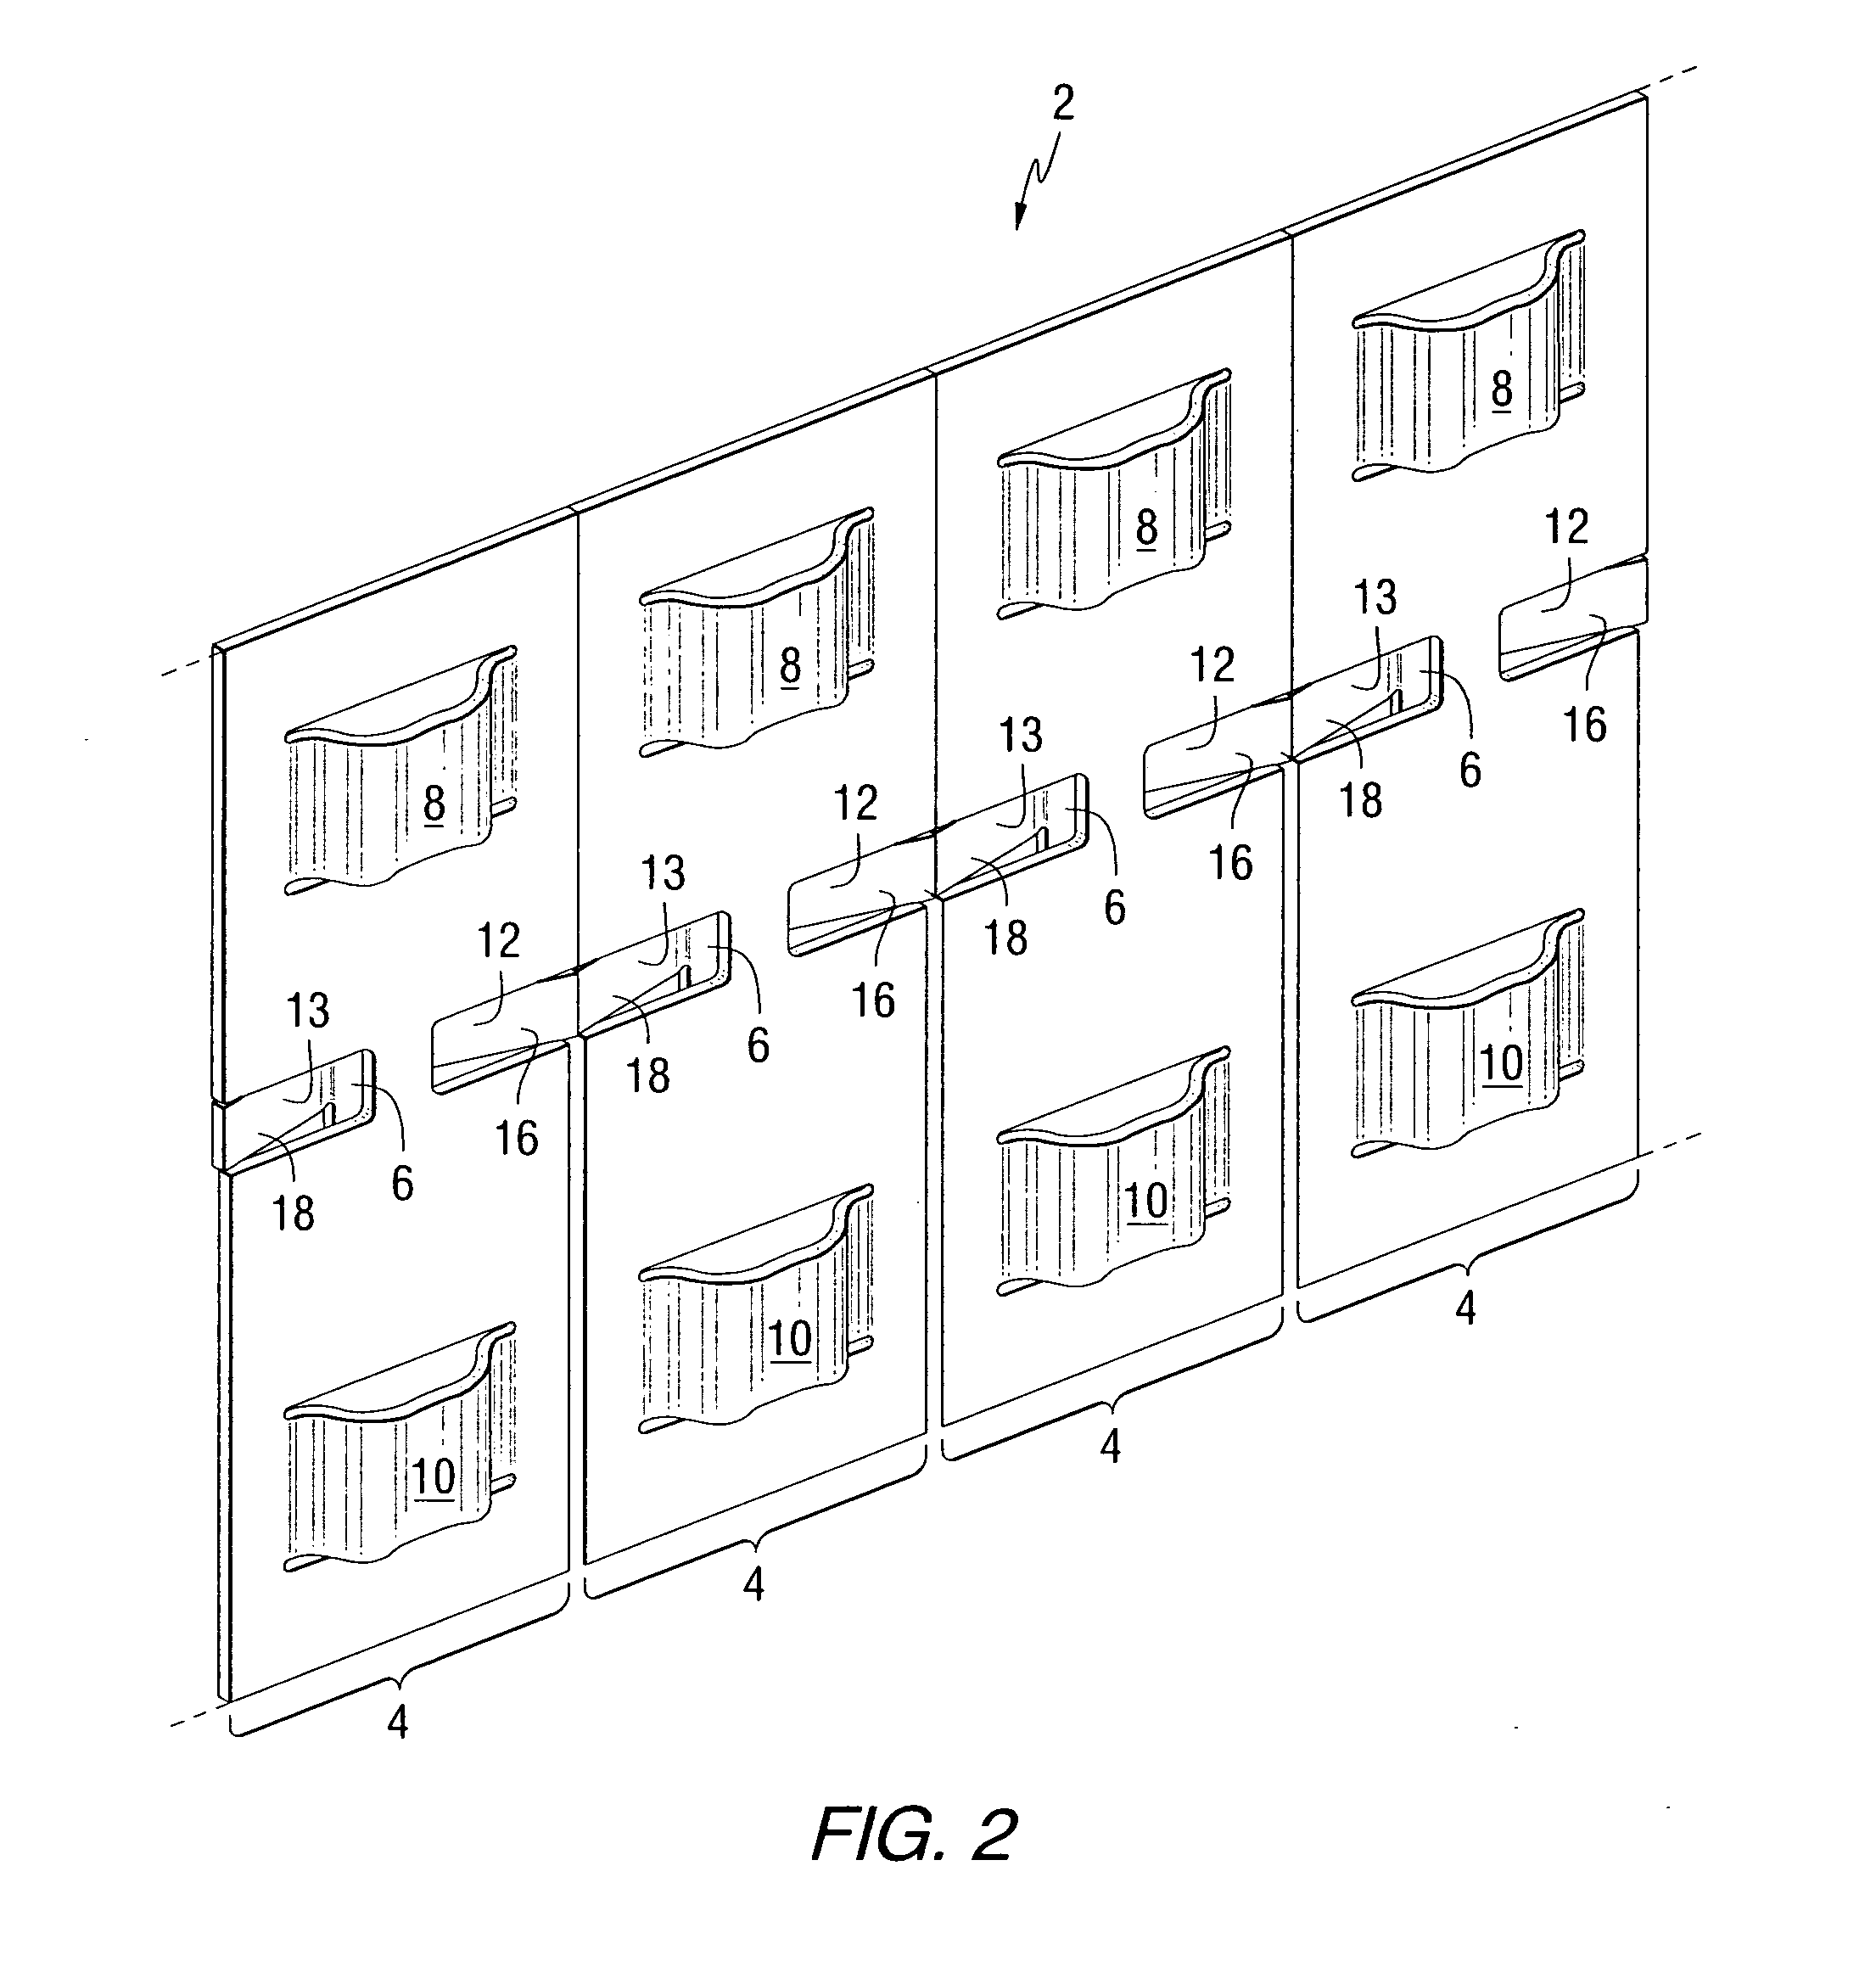 Bi-alloy spacer grid and associated methods